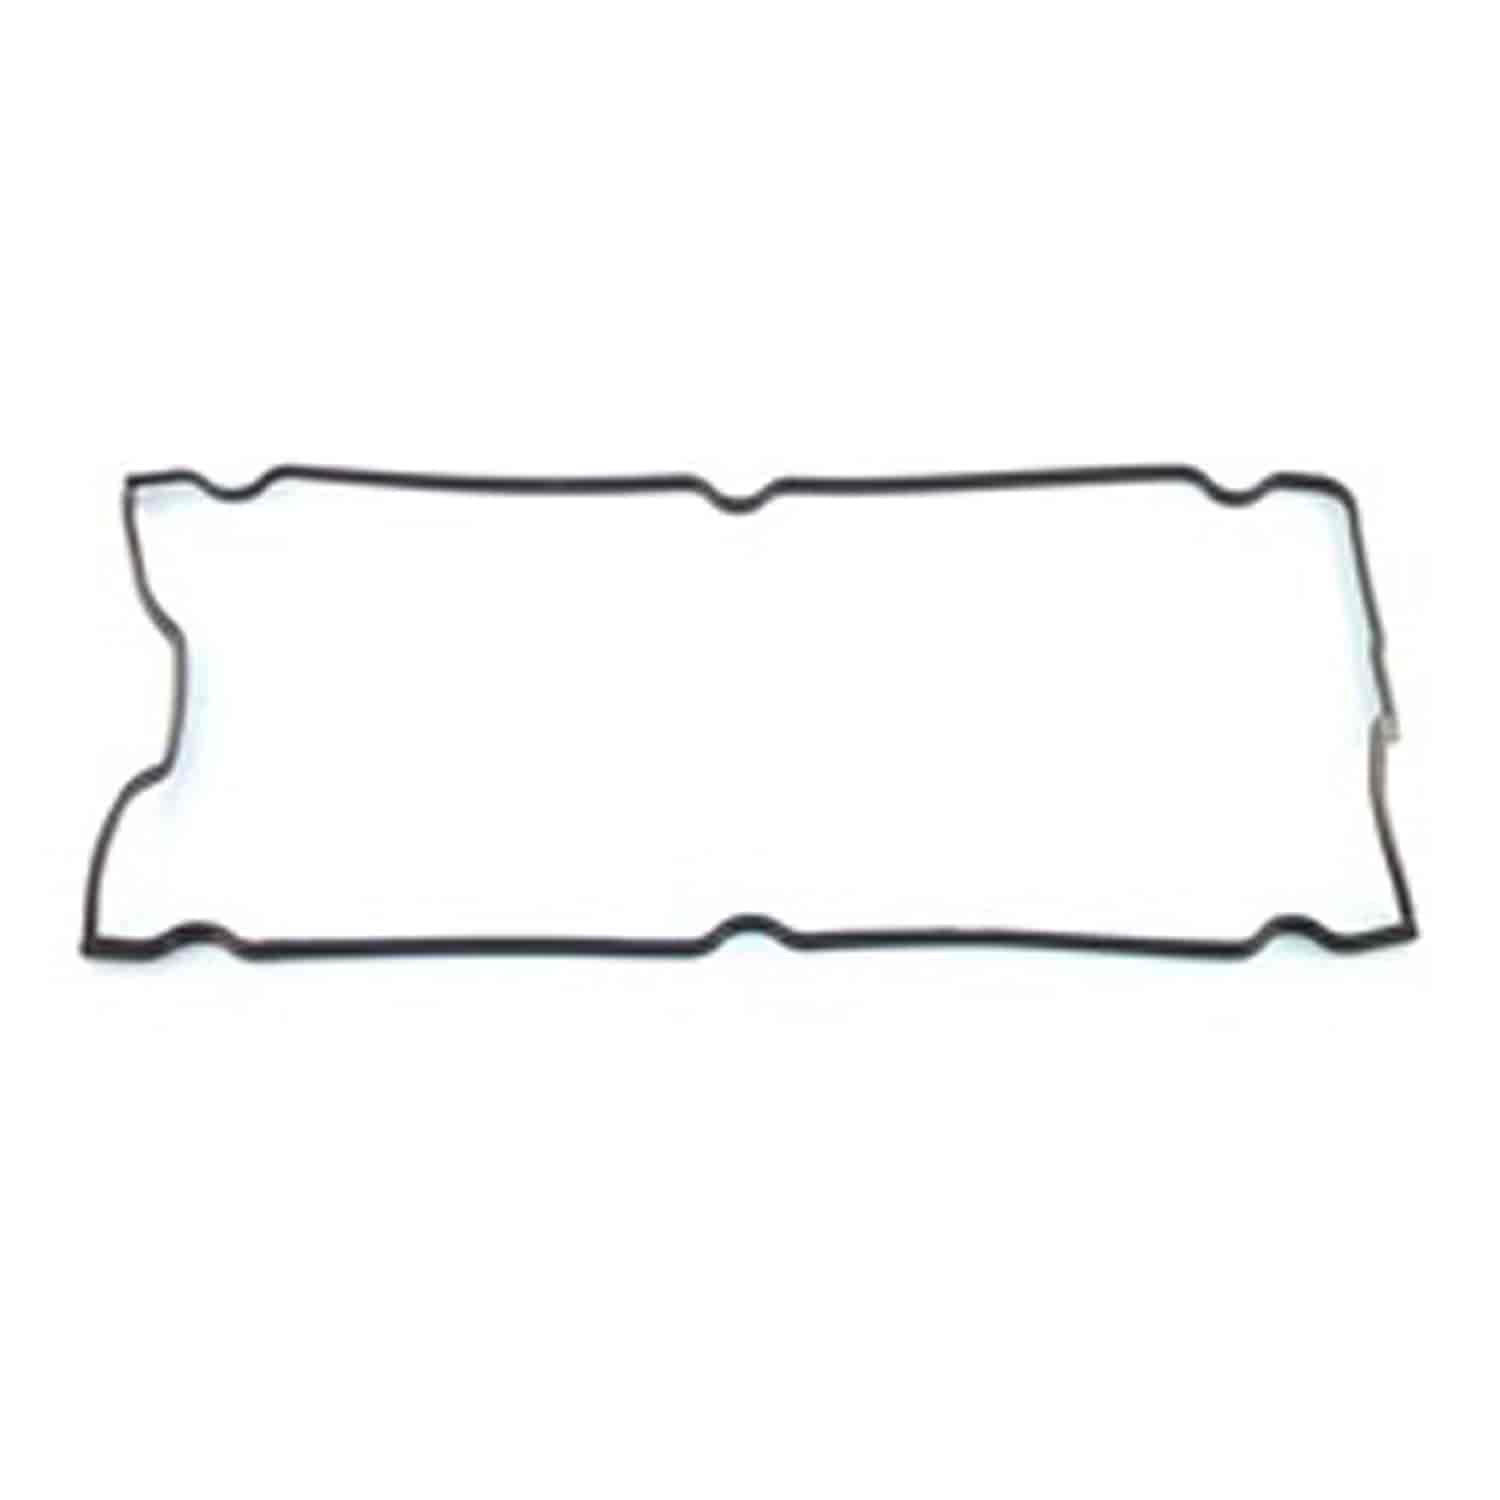 This valve cover gasket from Omix-ADA fits the